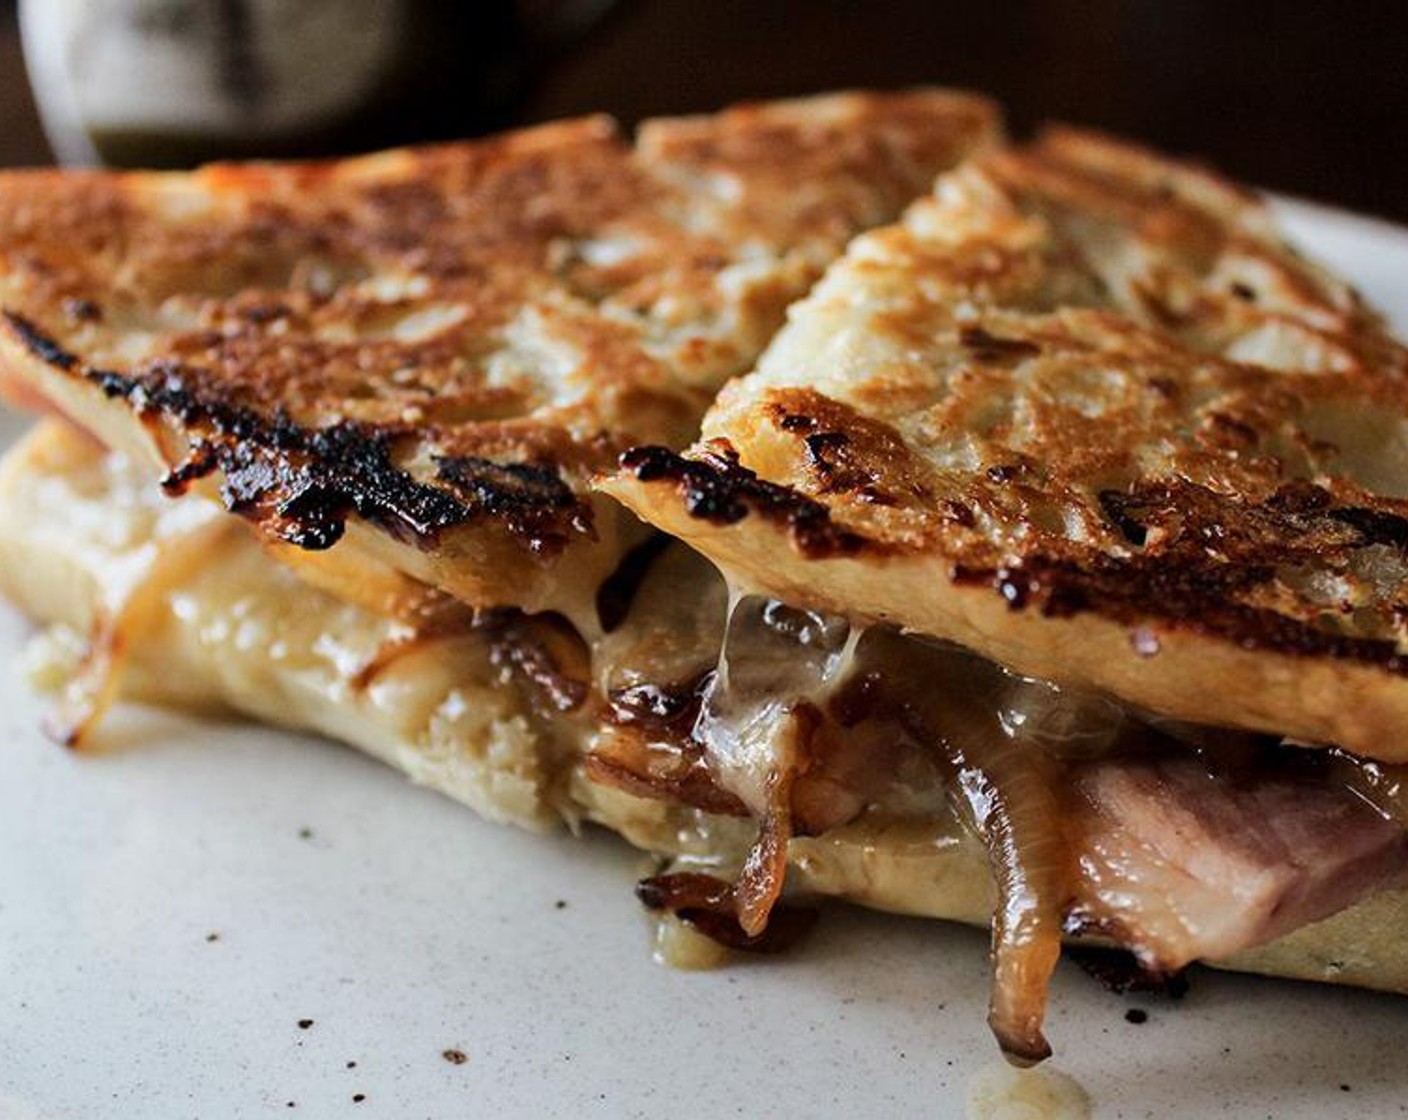 Monte Cristo Sandwich with Caramelized Onions & Maple Syrup